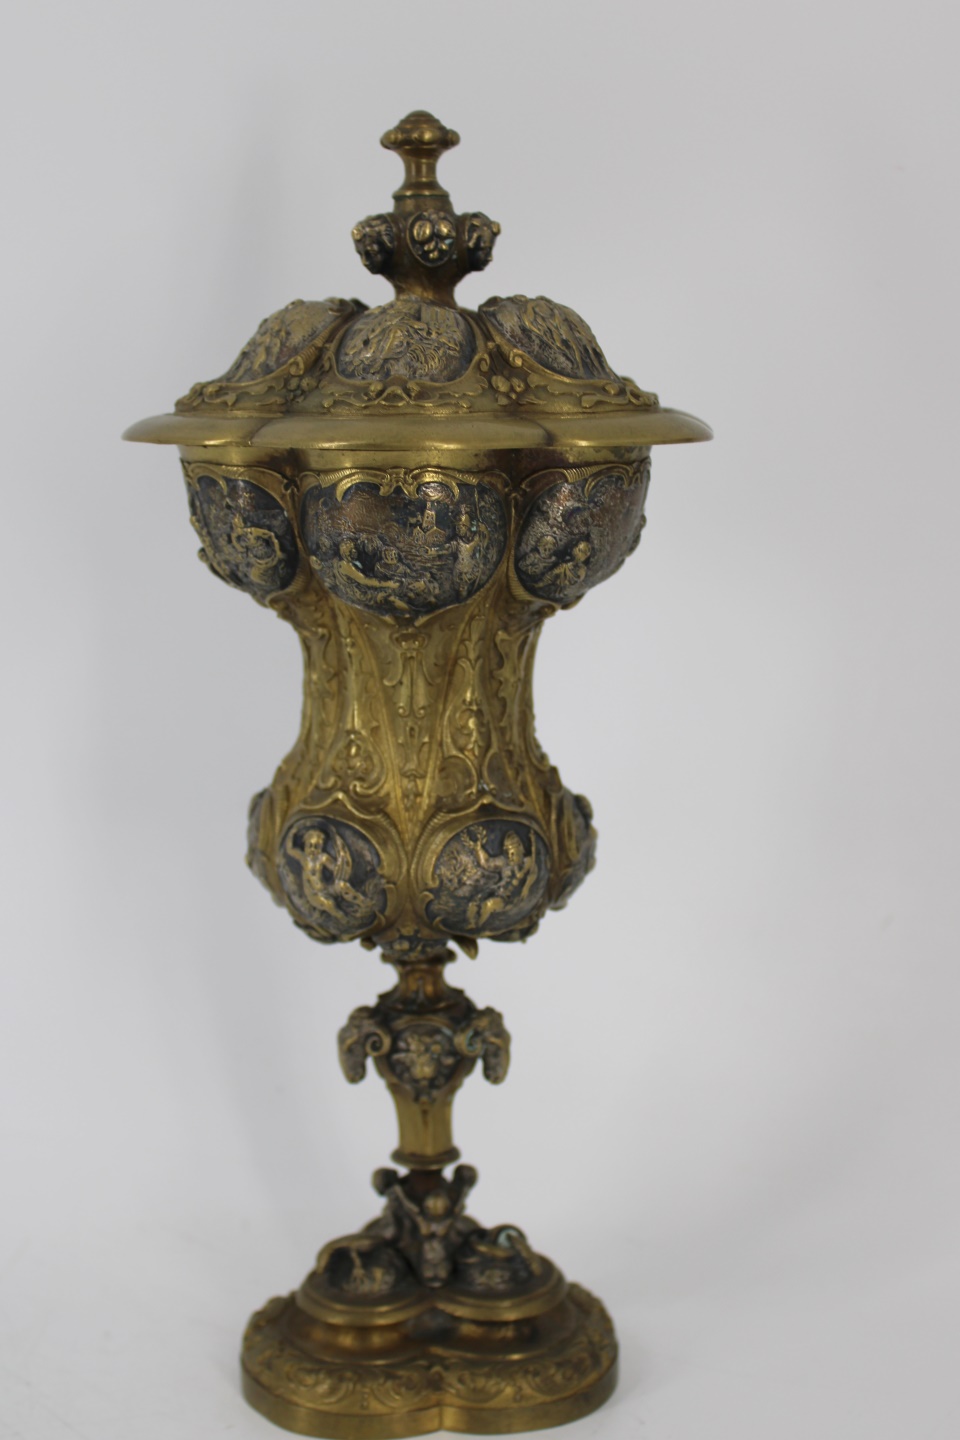 ORNATE SILVER AND GILT BRONZE LIDDED